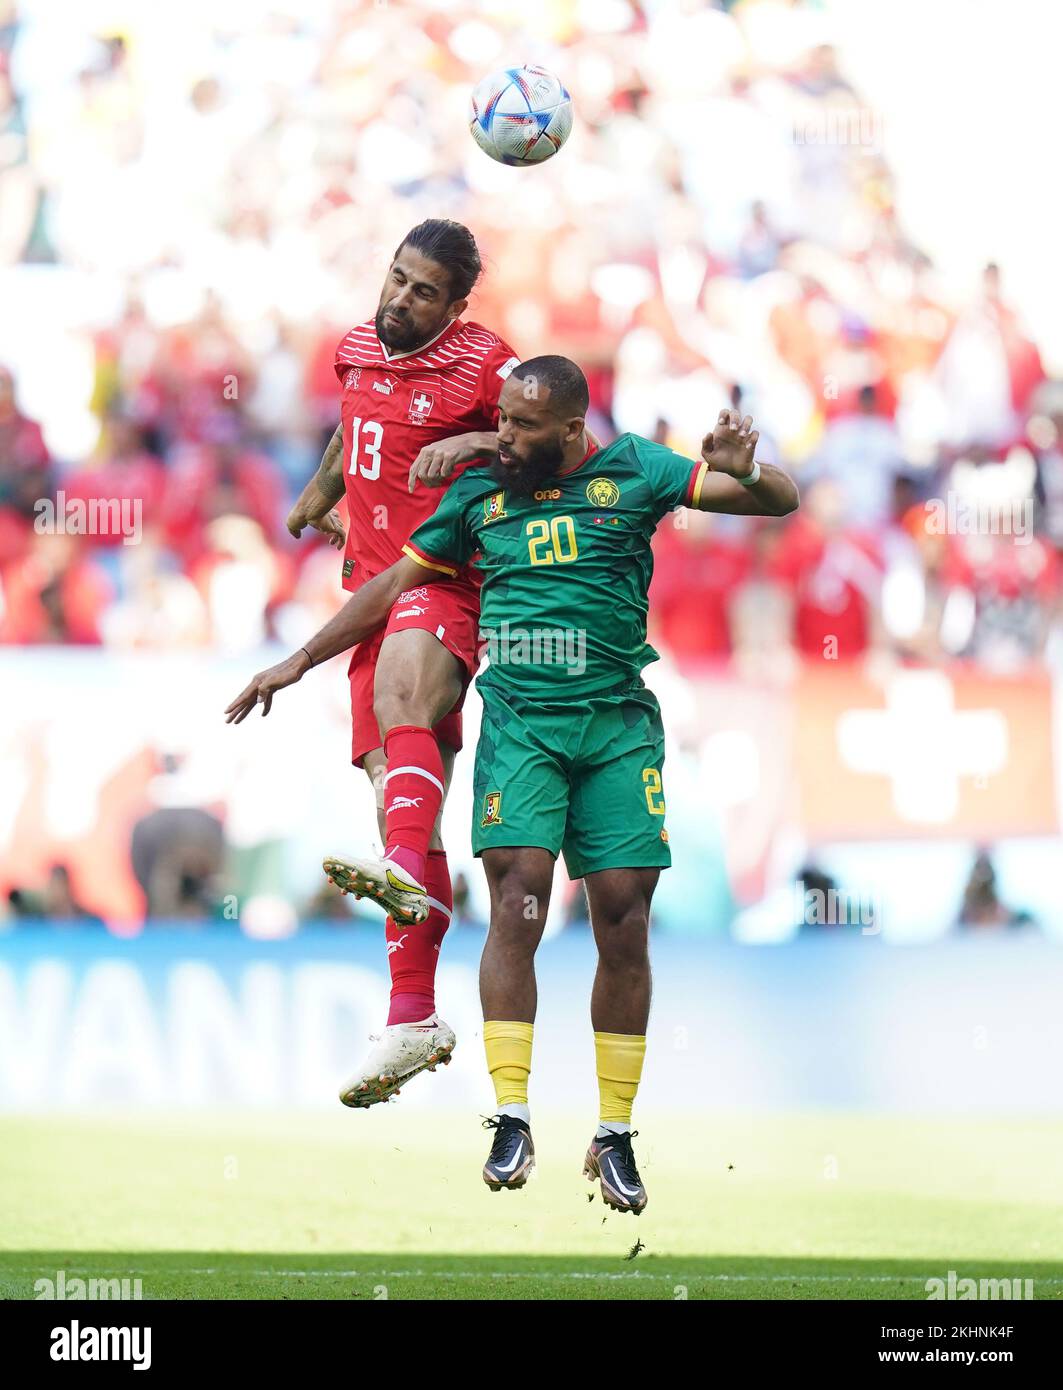 Switzerland's Ricardo Rodriguez (left) and Cameroon's Bryan Mbeumo battle for the ball during the FIFA World Cup Group G match at the Al Janoub Stadium, Al-Wakrah, Qatar. Picture date: Thursday November 24, 2022. Stock Photo